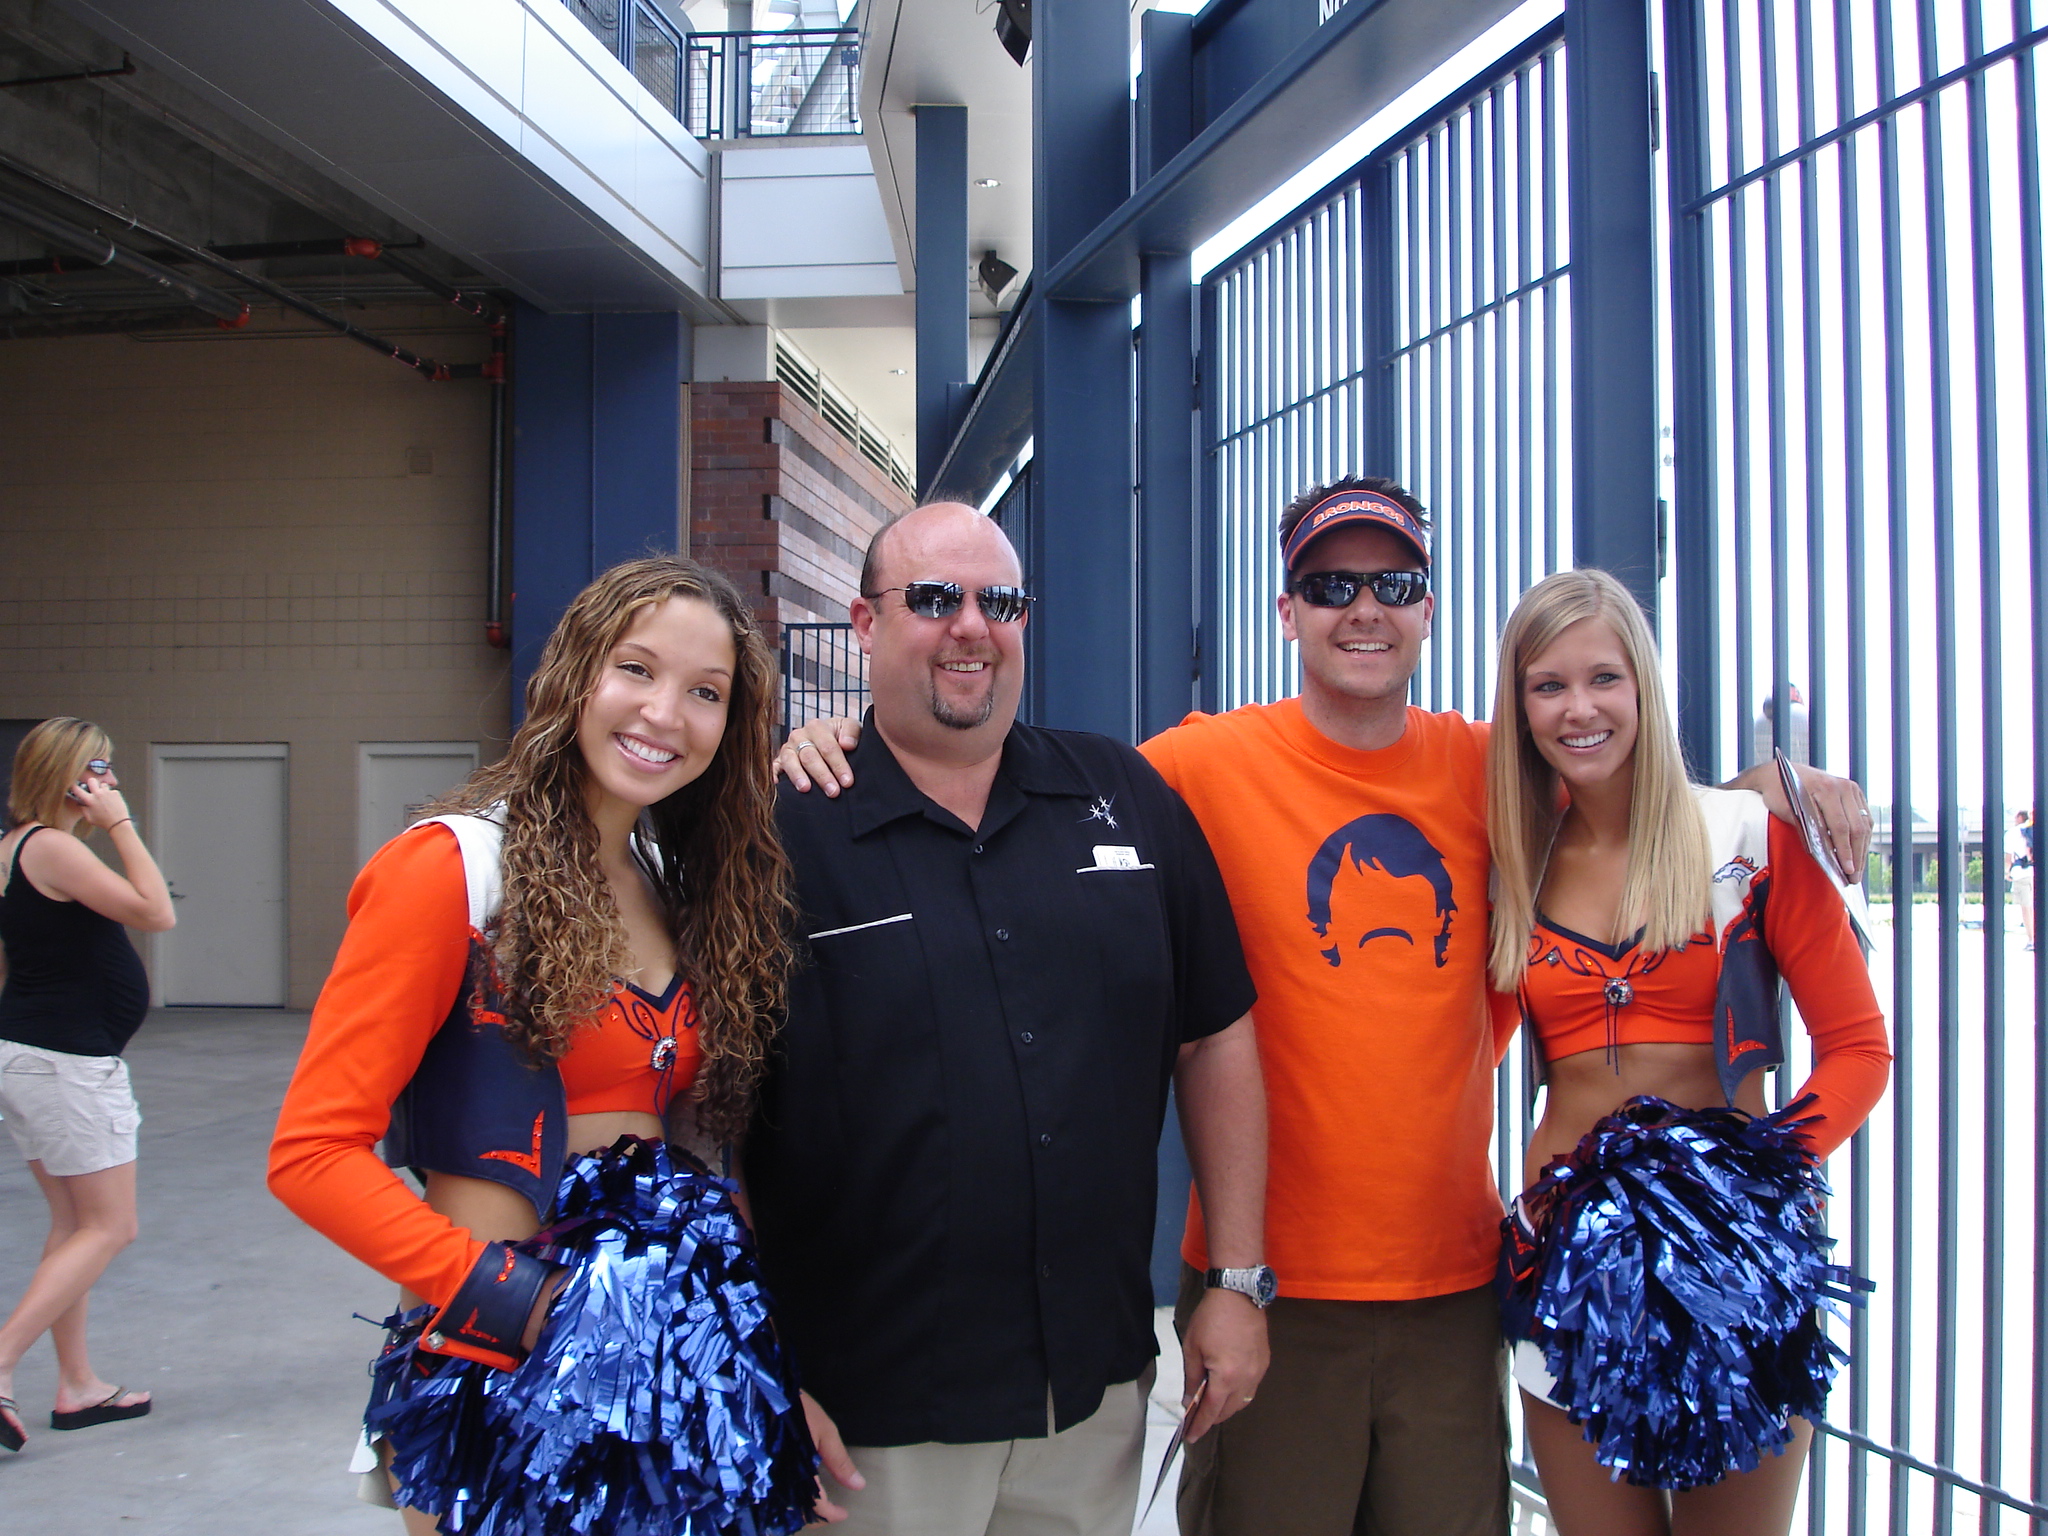 Two men in Denver Broncos fan shirts smile for the camera with two DEnver Broncos cheerleaders.